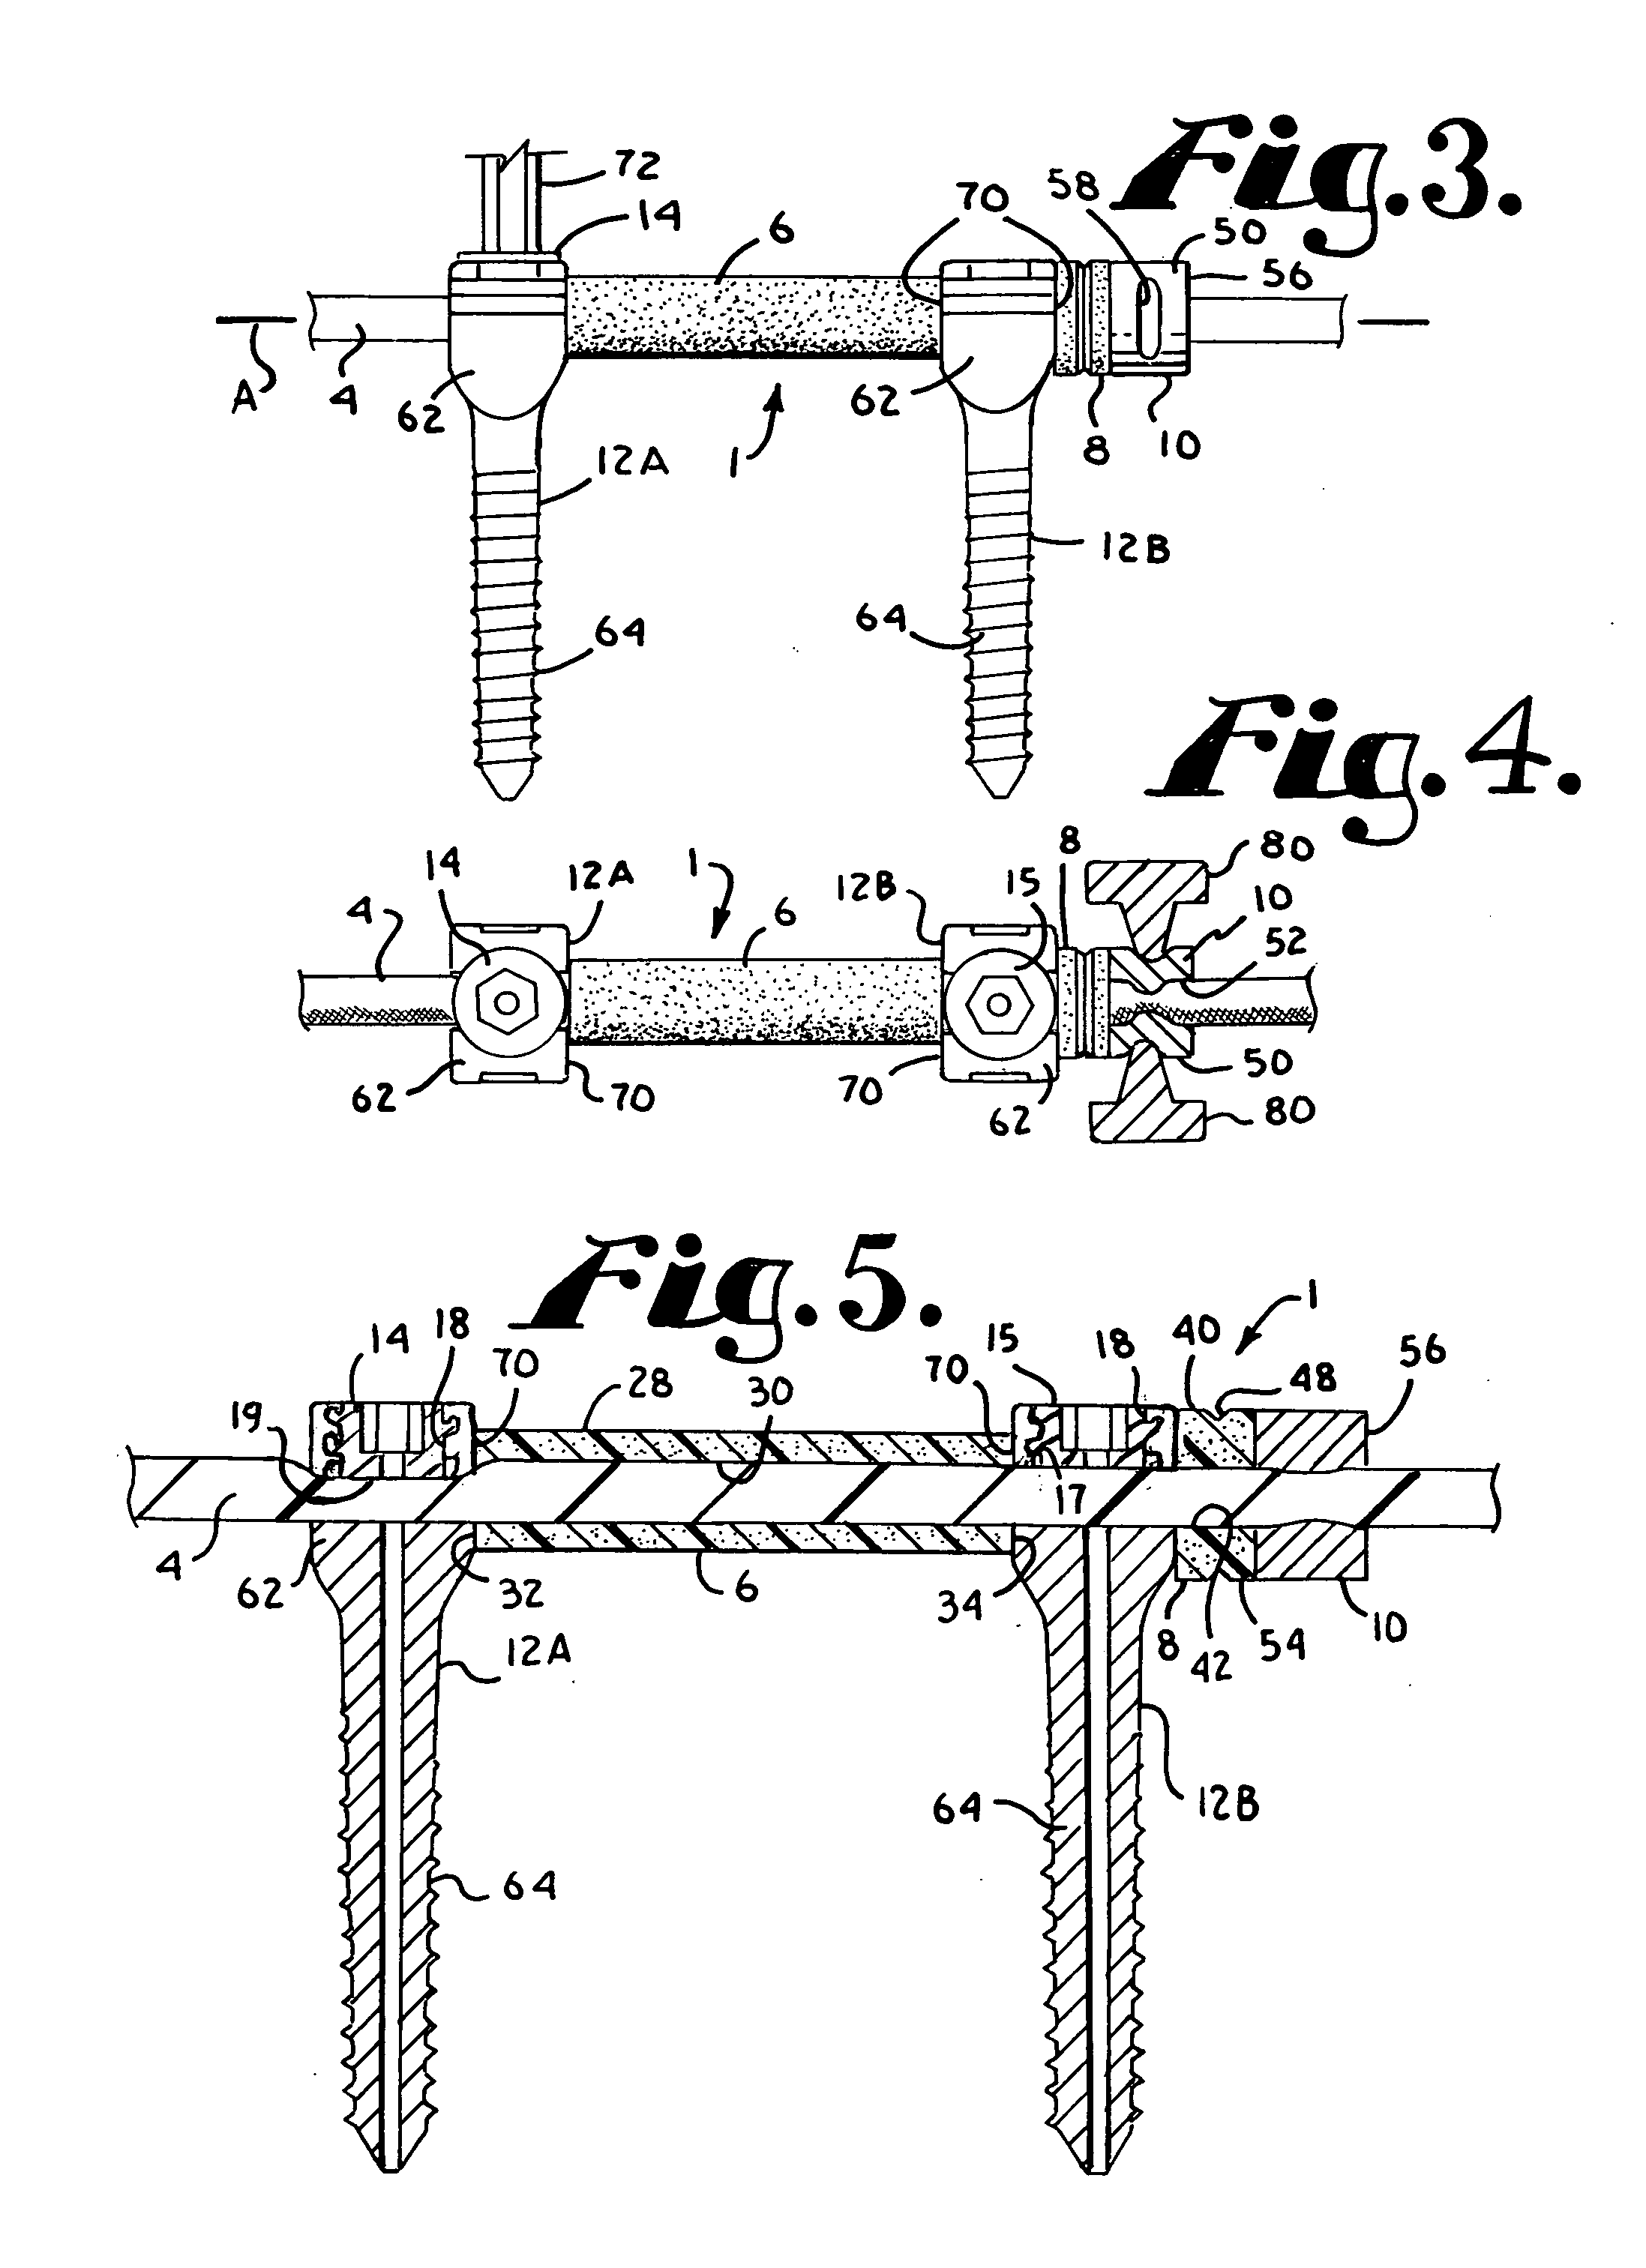 Dynamic spinal stabilization assembly with elastic bumpers and locking limited travel closure mechanisms